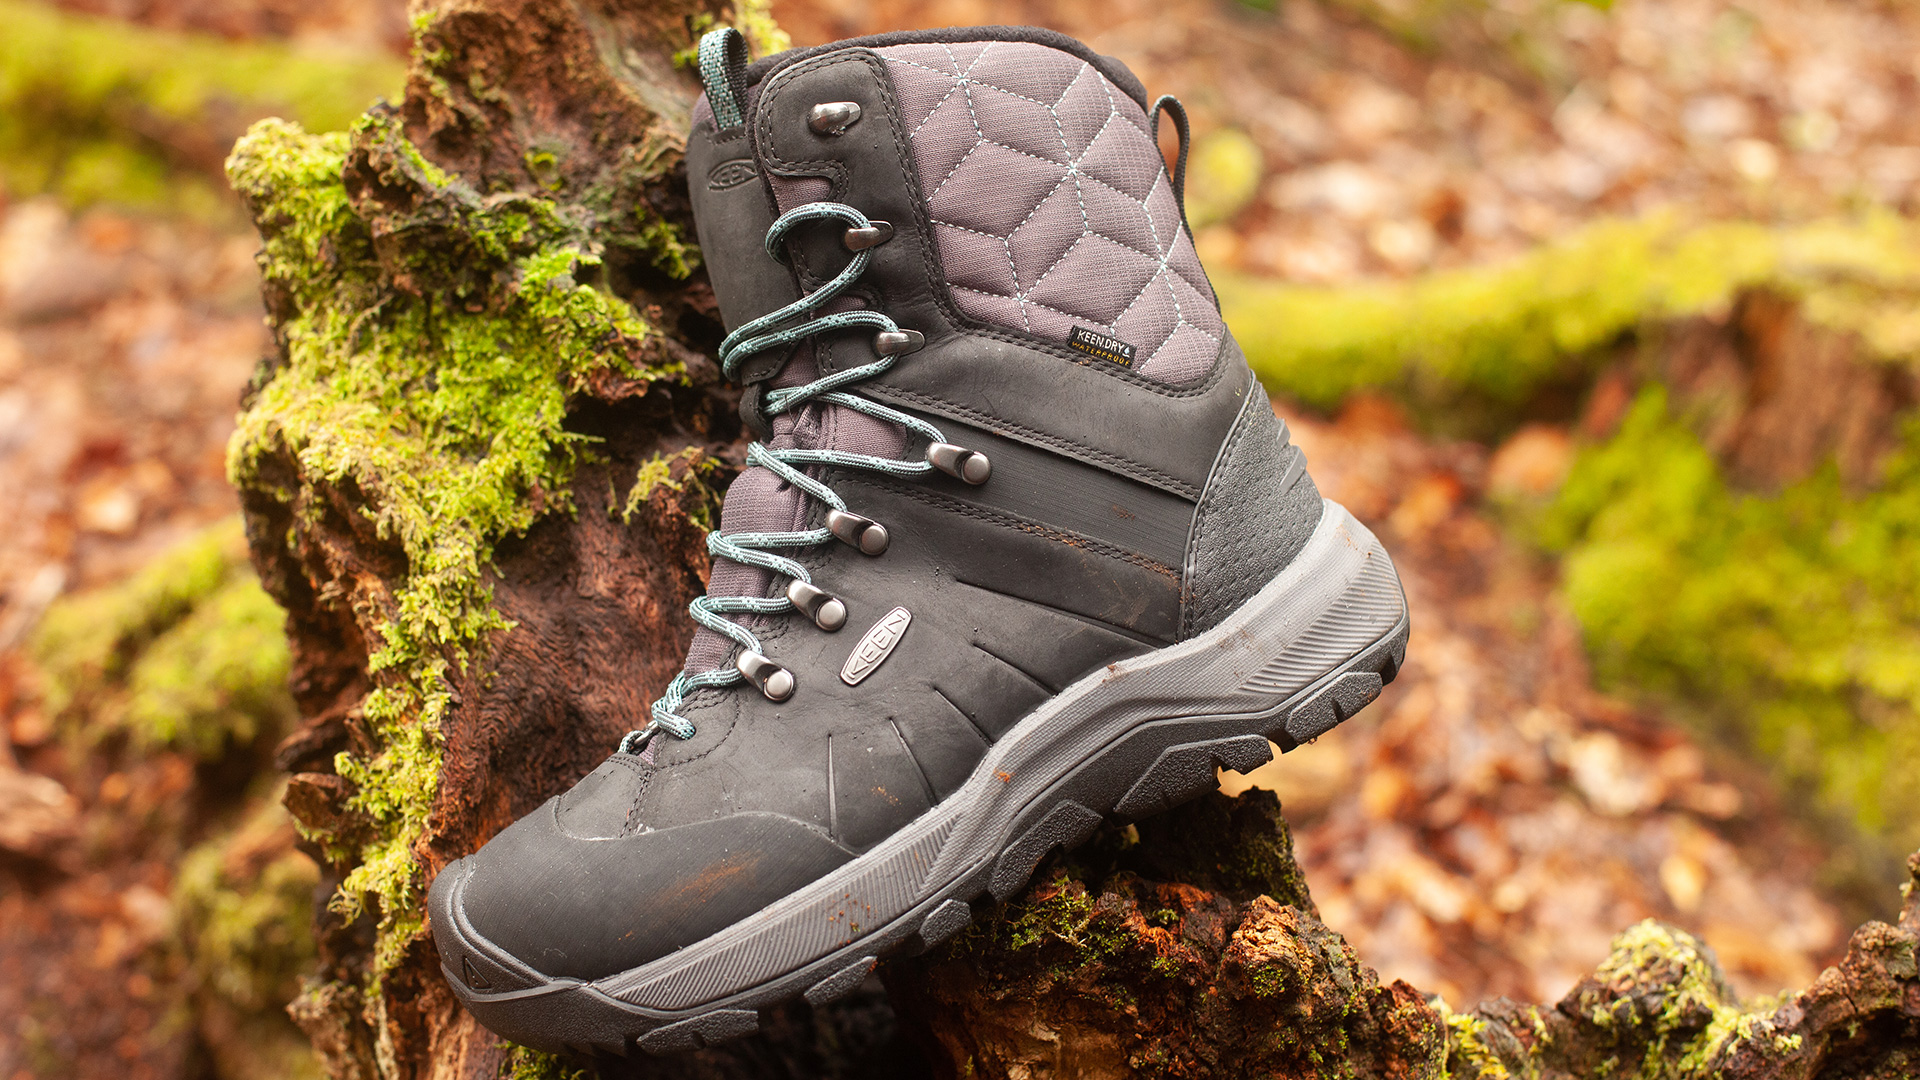 Best women's hiking boots 2021: walking boots to take on any terrain | T3